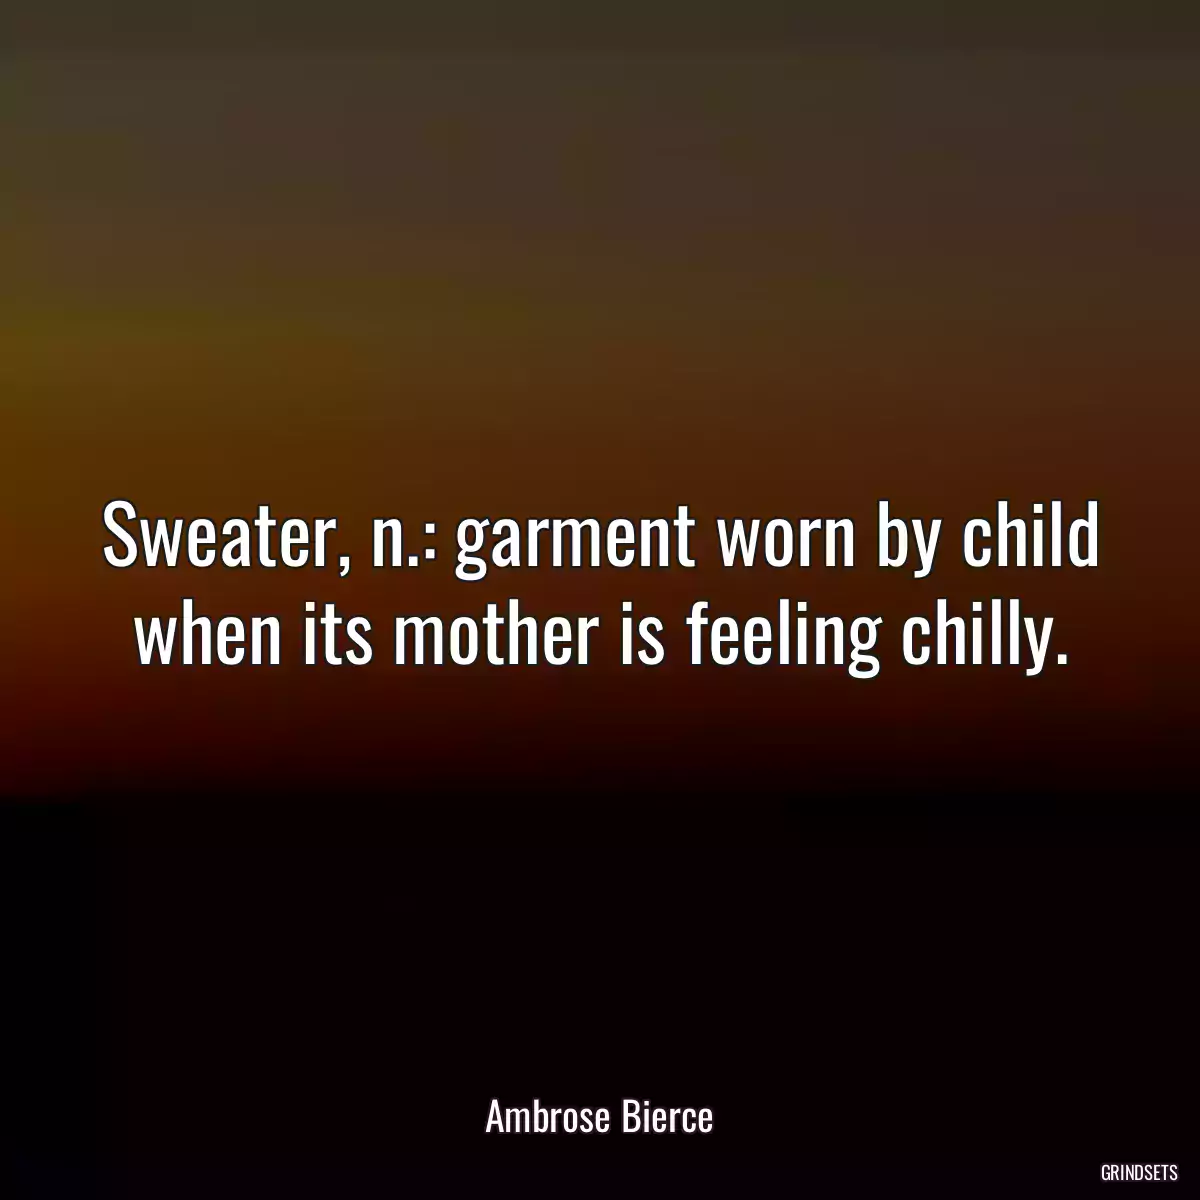 Sweater, n.: garment worn by child when its mother is feeling chilly.